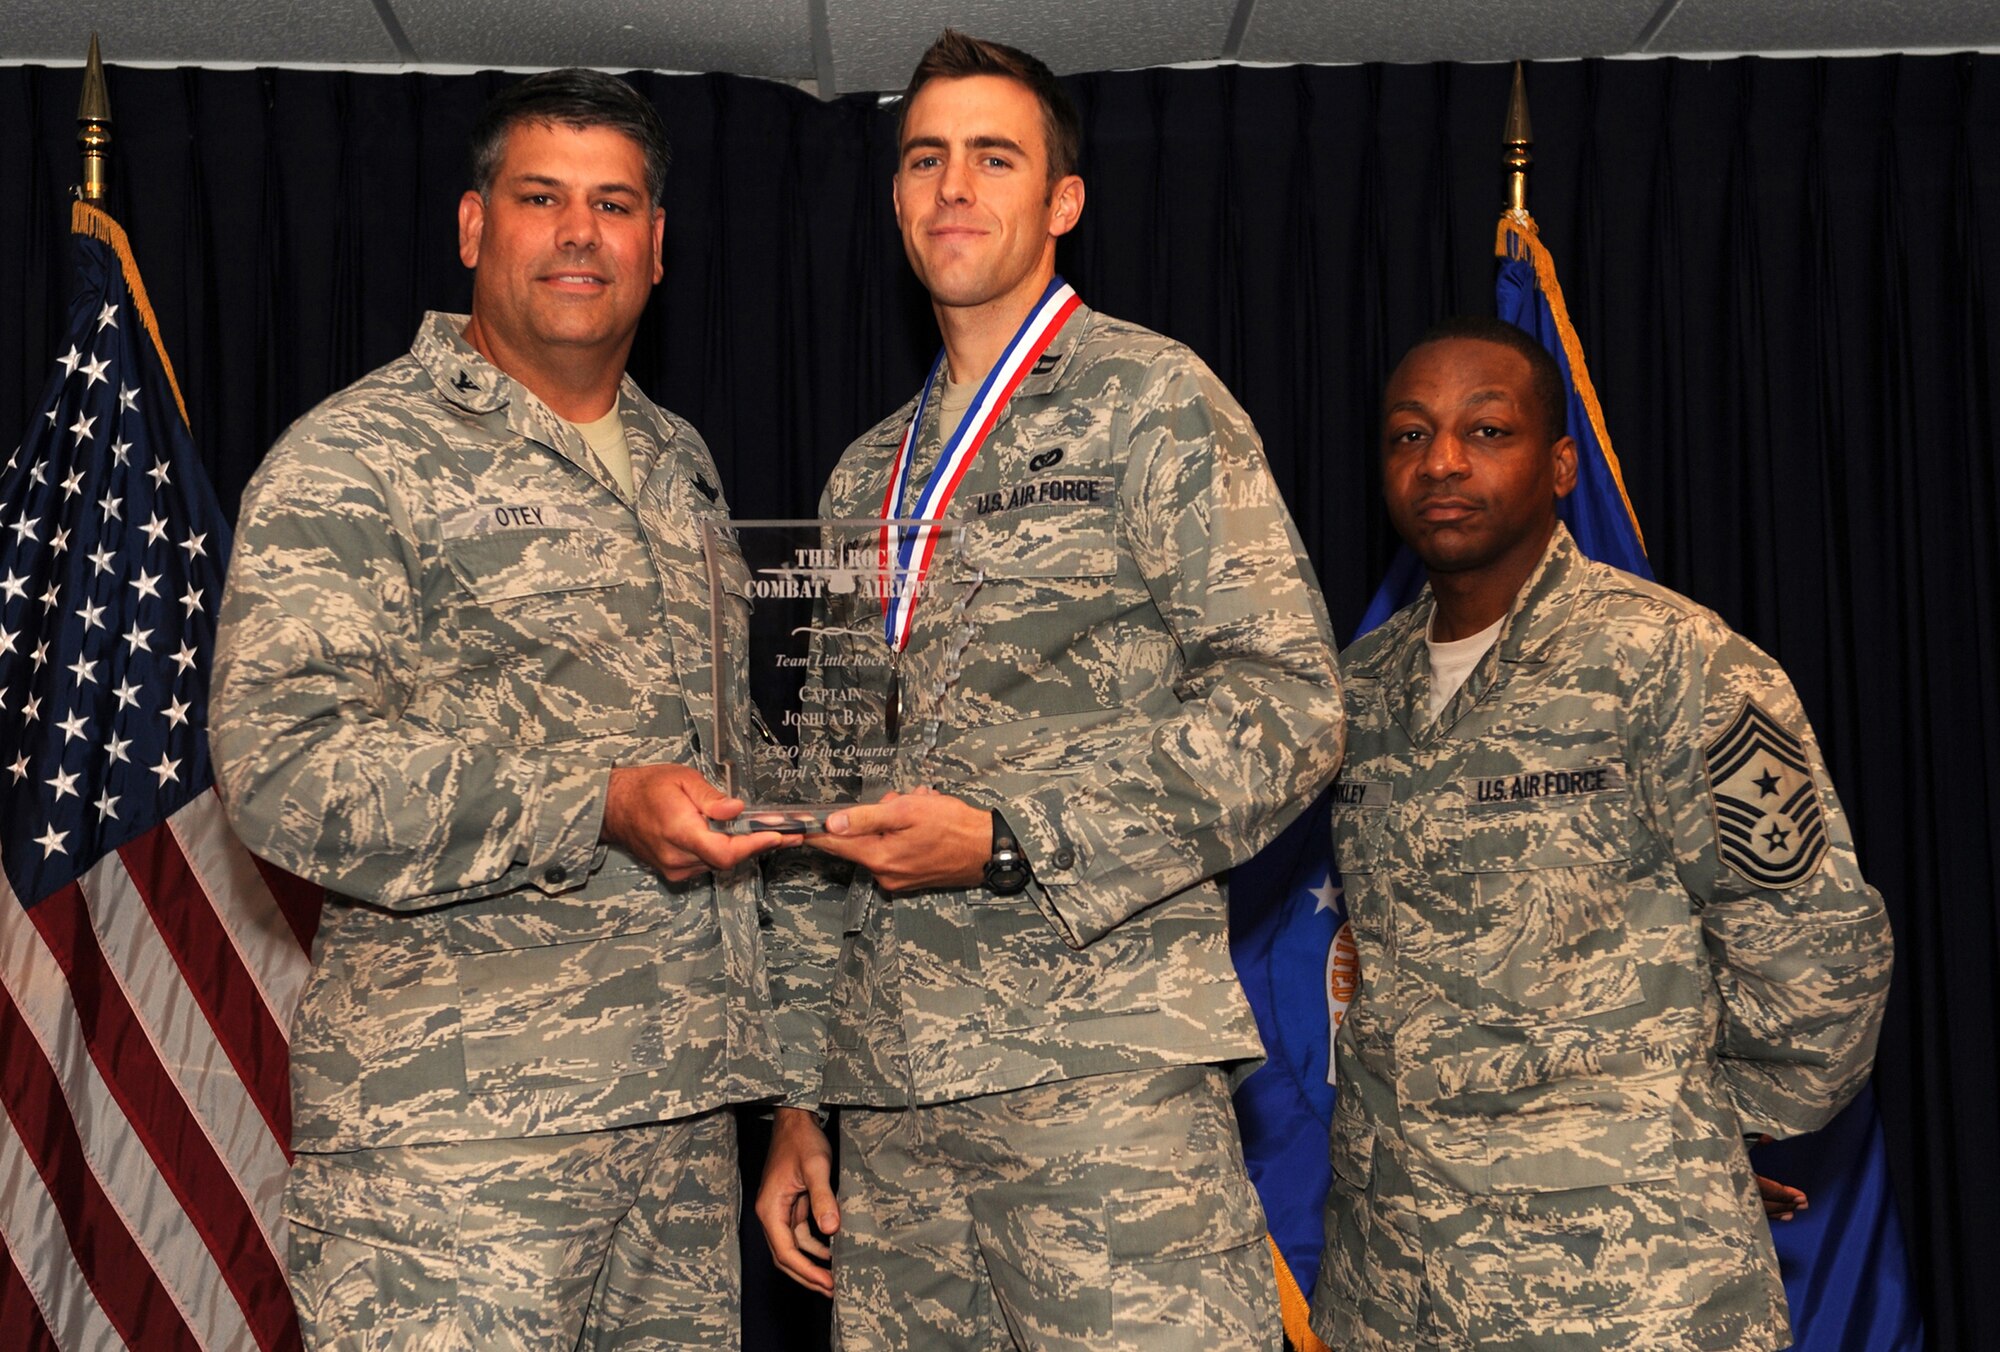 Col. Greg Otey, 19th Airlift Wing commander, and Chief Master Sgt. Anthony Brinkley, 19th Airlift Wing command chief, presents  Capt. Joshua Bass, 19th Civil Engineer Squadron, a quarterly award for company grade officer of the quarter at Little Rock Air Force Base, Ark. July 30. (U. S. Air Force photo by Senior Airman Jim Araos)